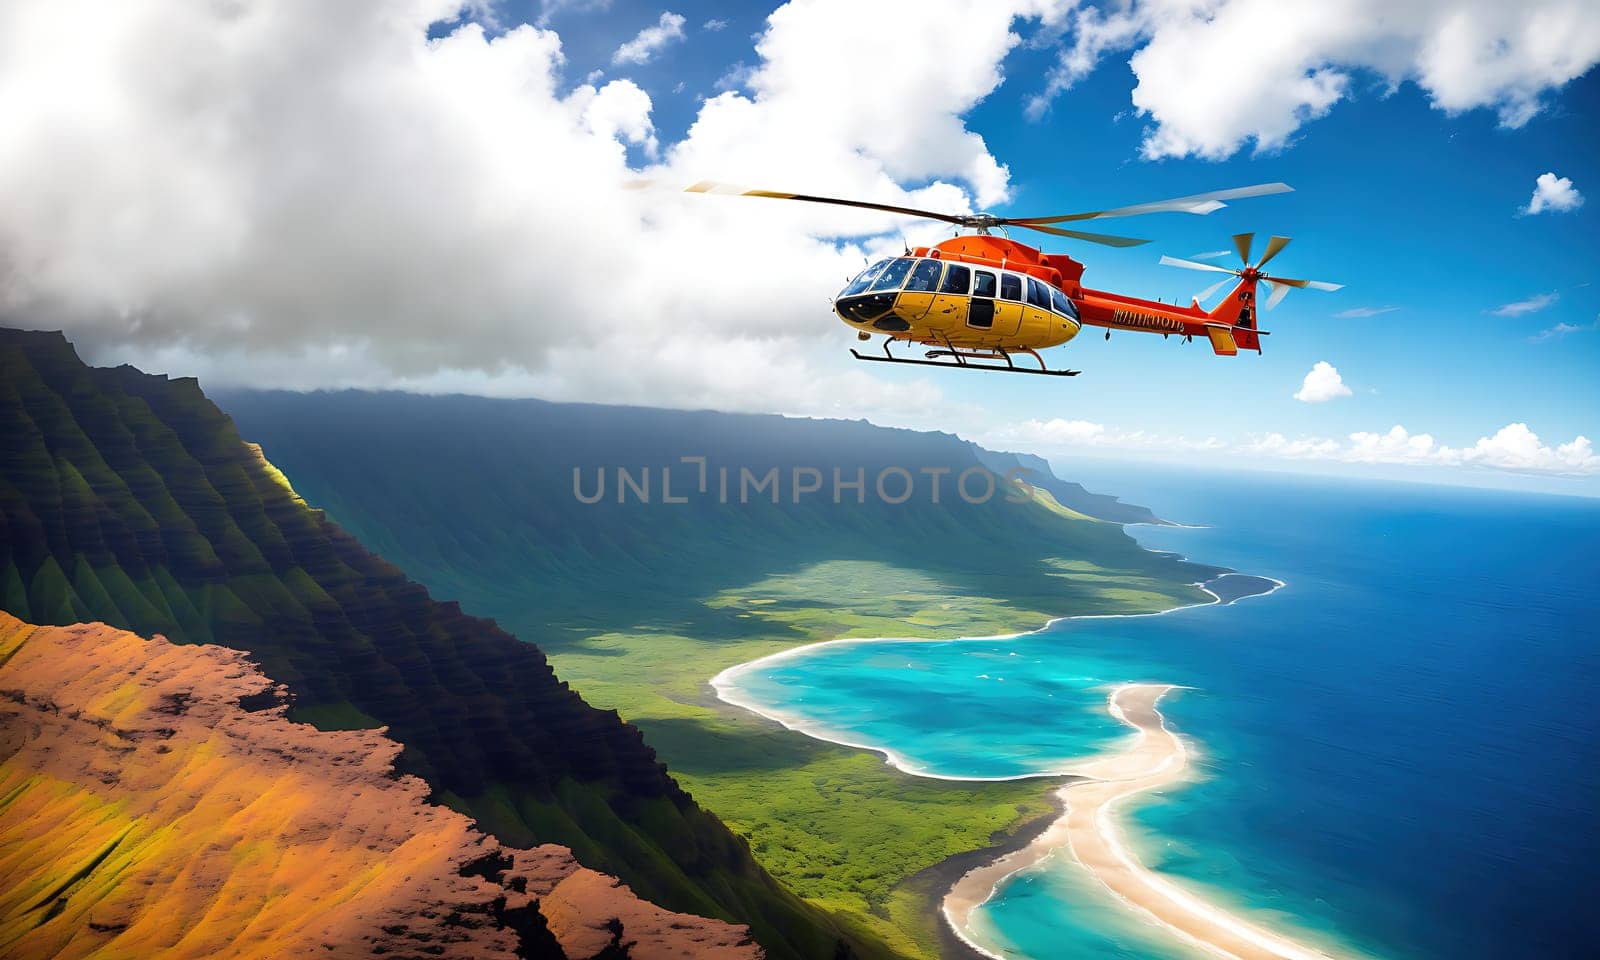 A helicopter flies over a lush green valley with a body of water in the distance.